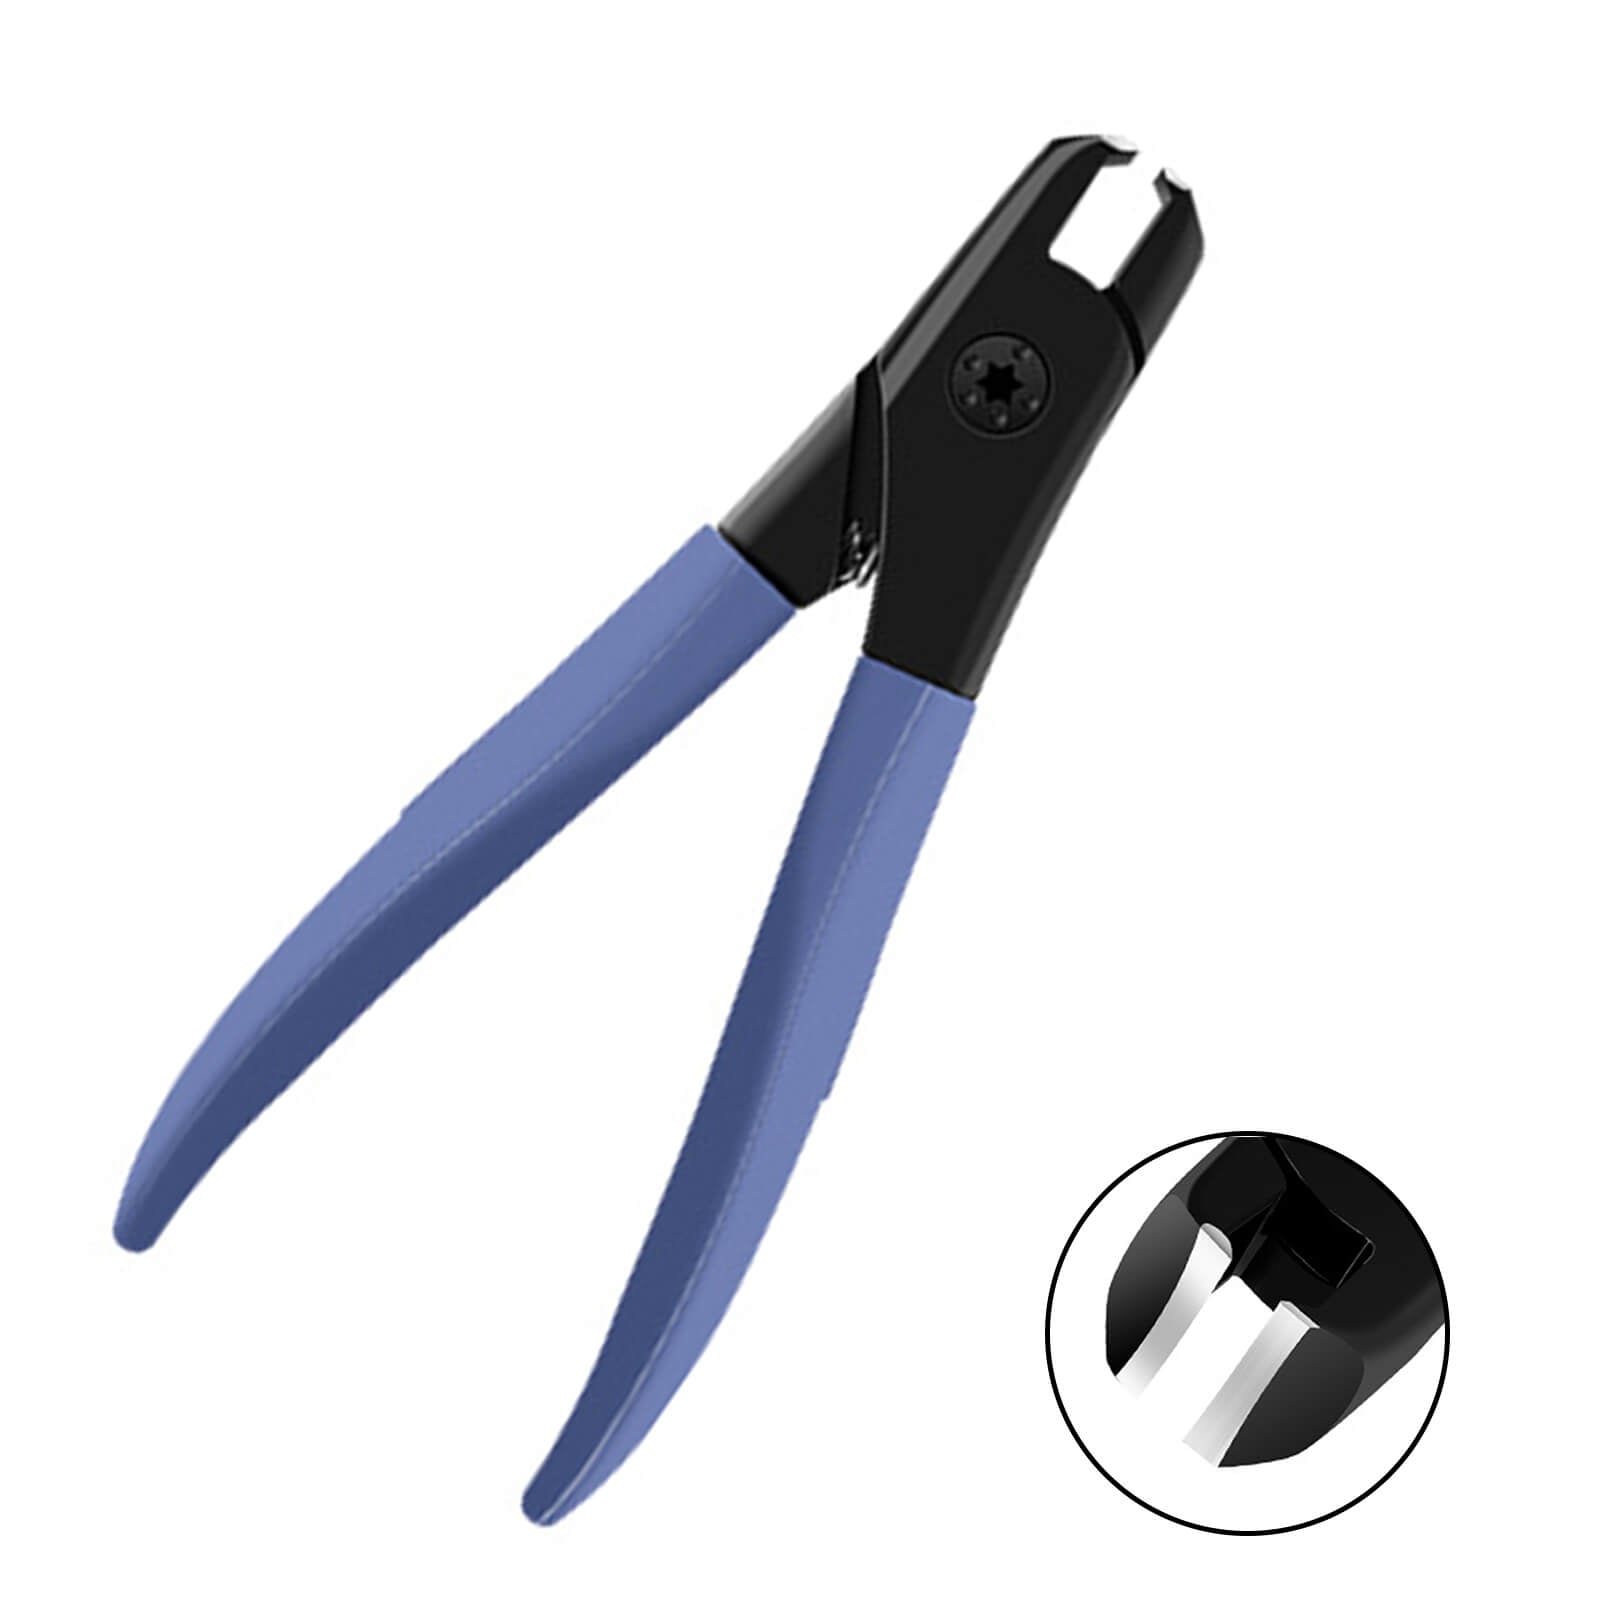 Large Stainless Steel Thick Toe Nail Clipper With File For Personal Care  Rectangle Sharp Finger Nails Trimmer And Cutter From Hayoumart8, $3.28 |  DHgate.Com